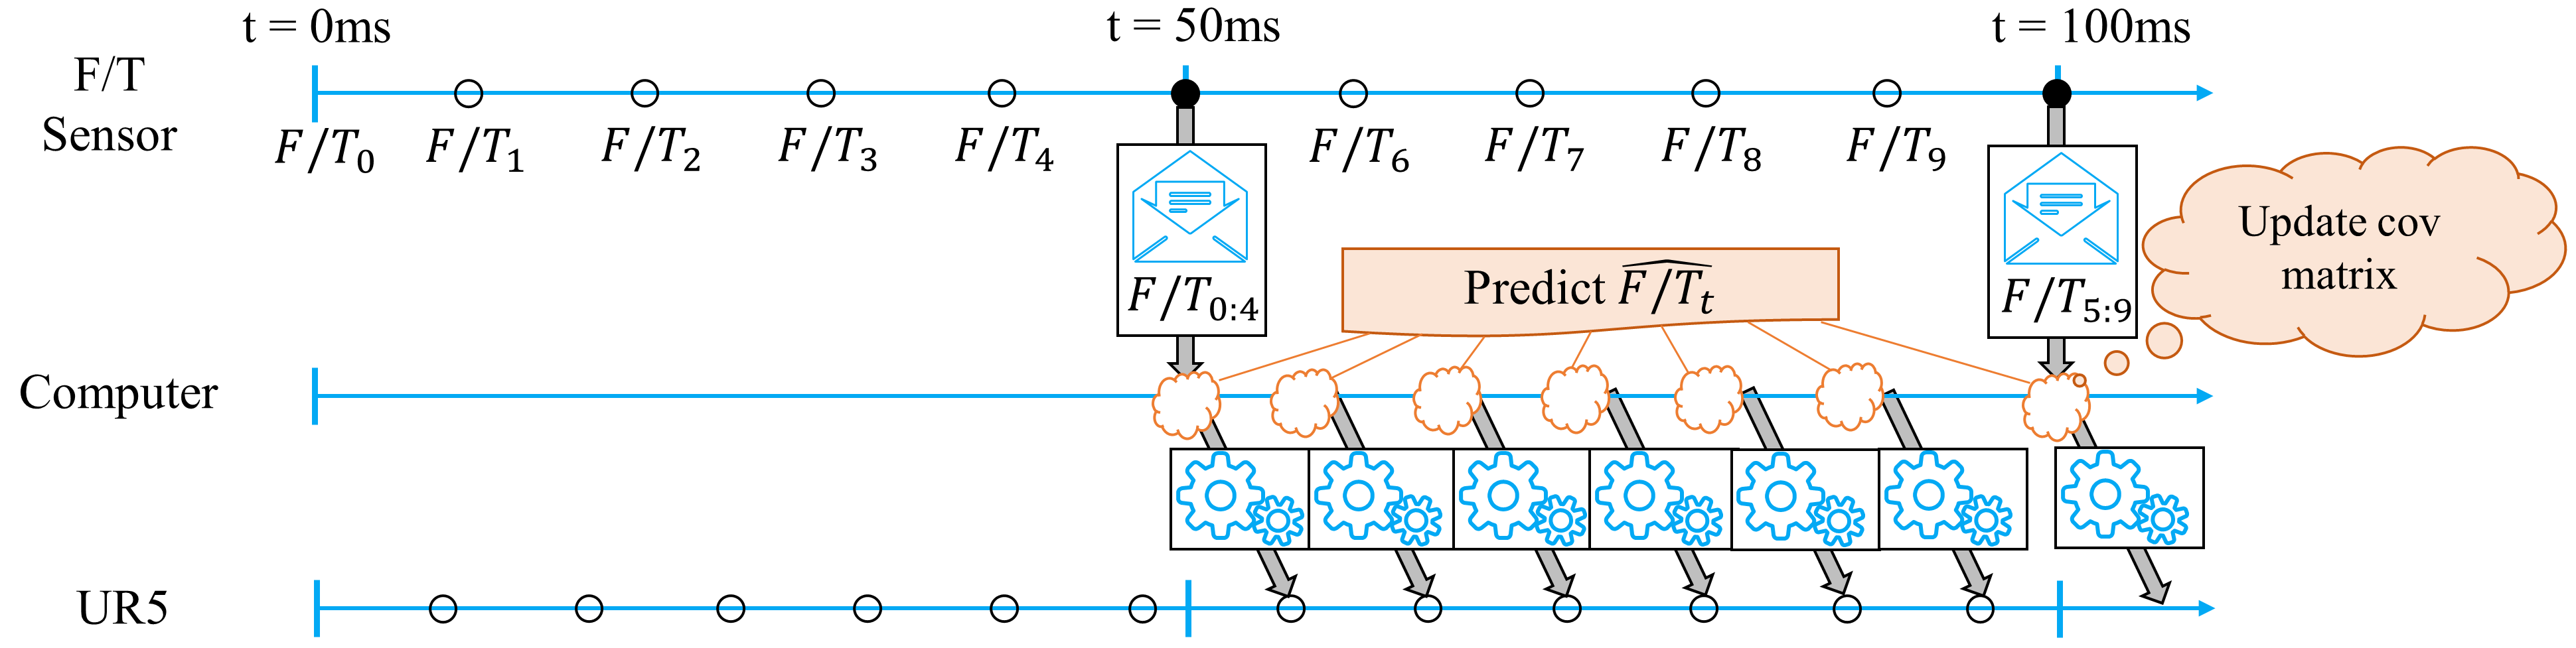  A more advanced robot control scheme that uses adaptive Kalman filtering to predict inter-packet F/T readings so that it can command the robot as fast as possible.